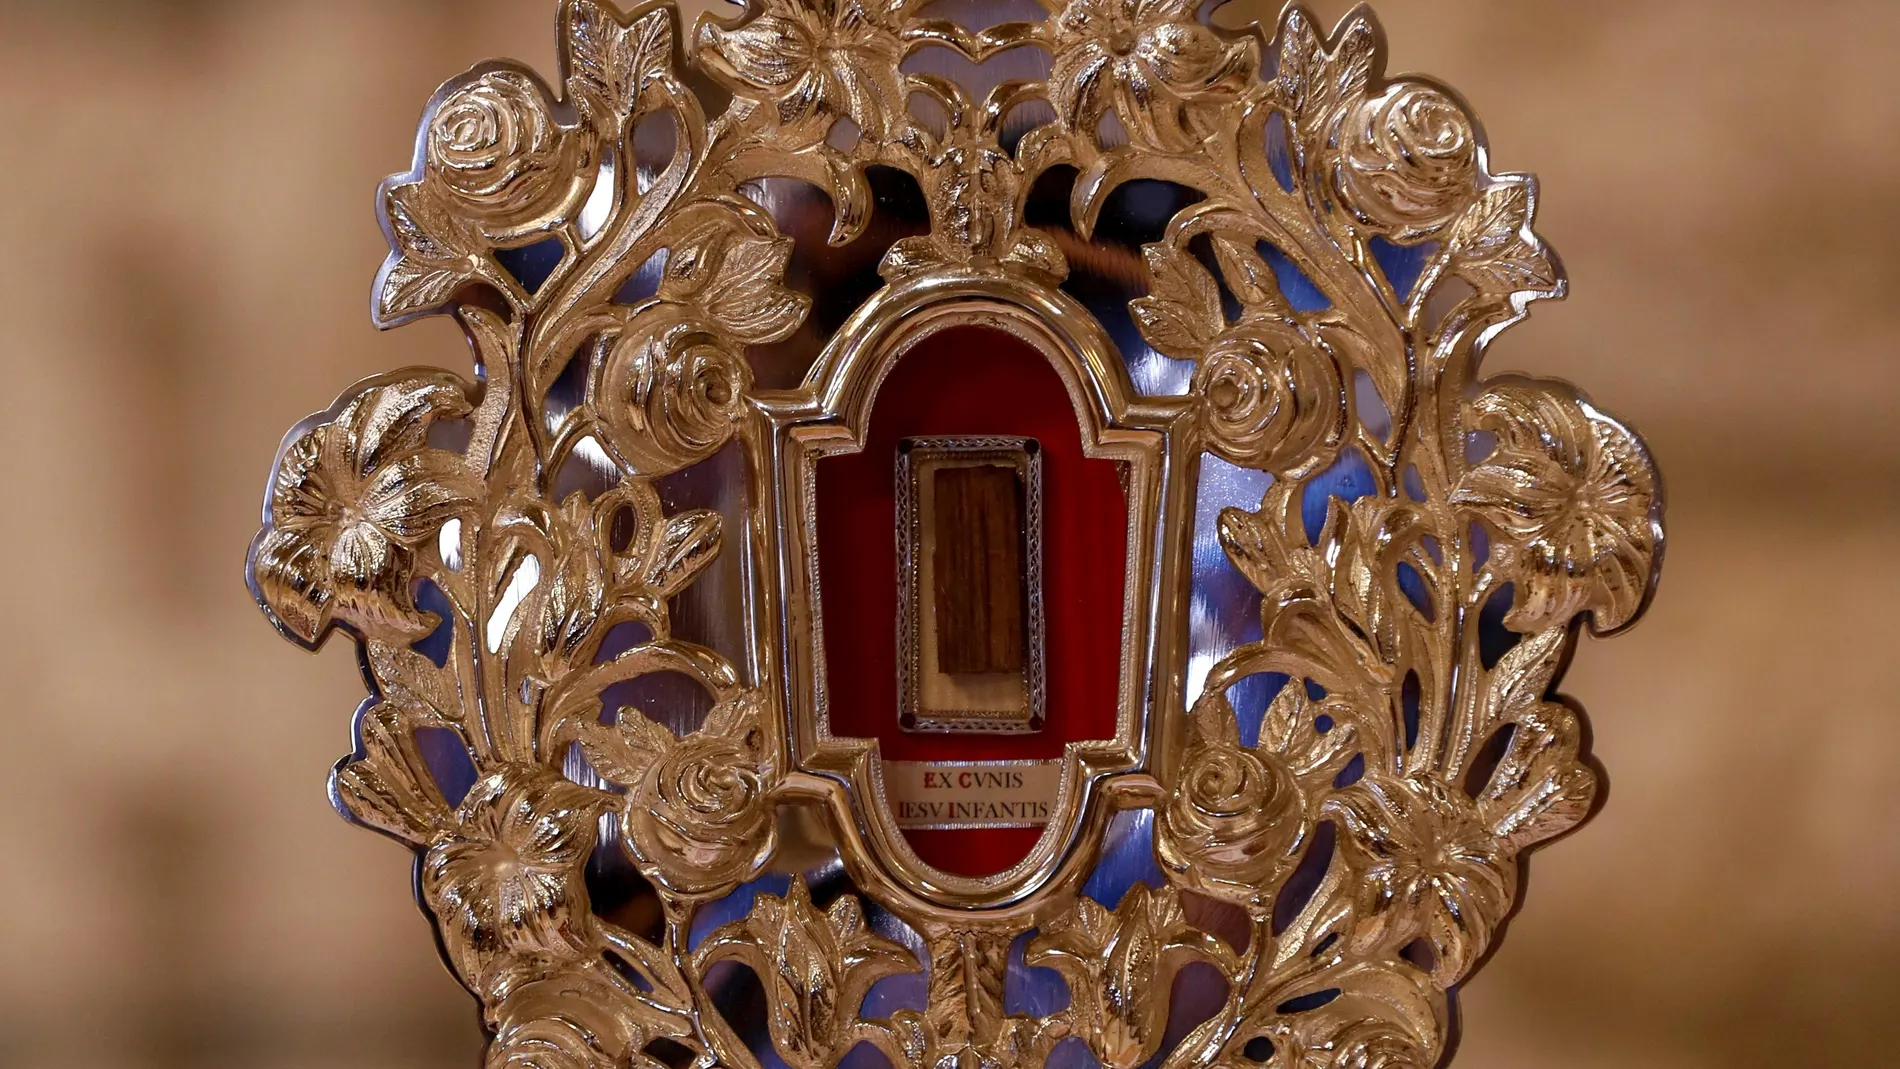 Relic of the Holy Crib of the Child Jesus in Jerusalem